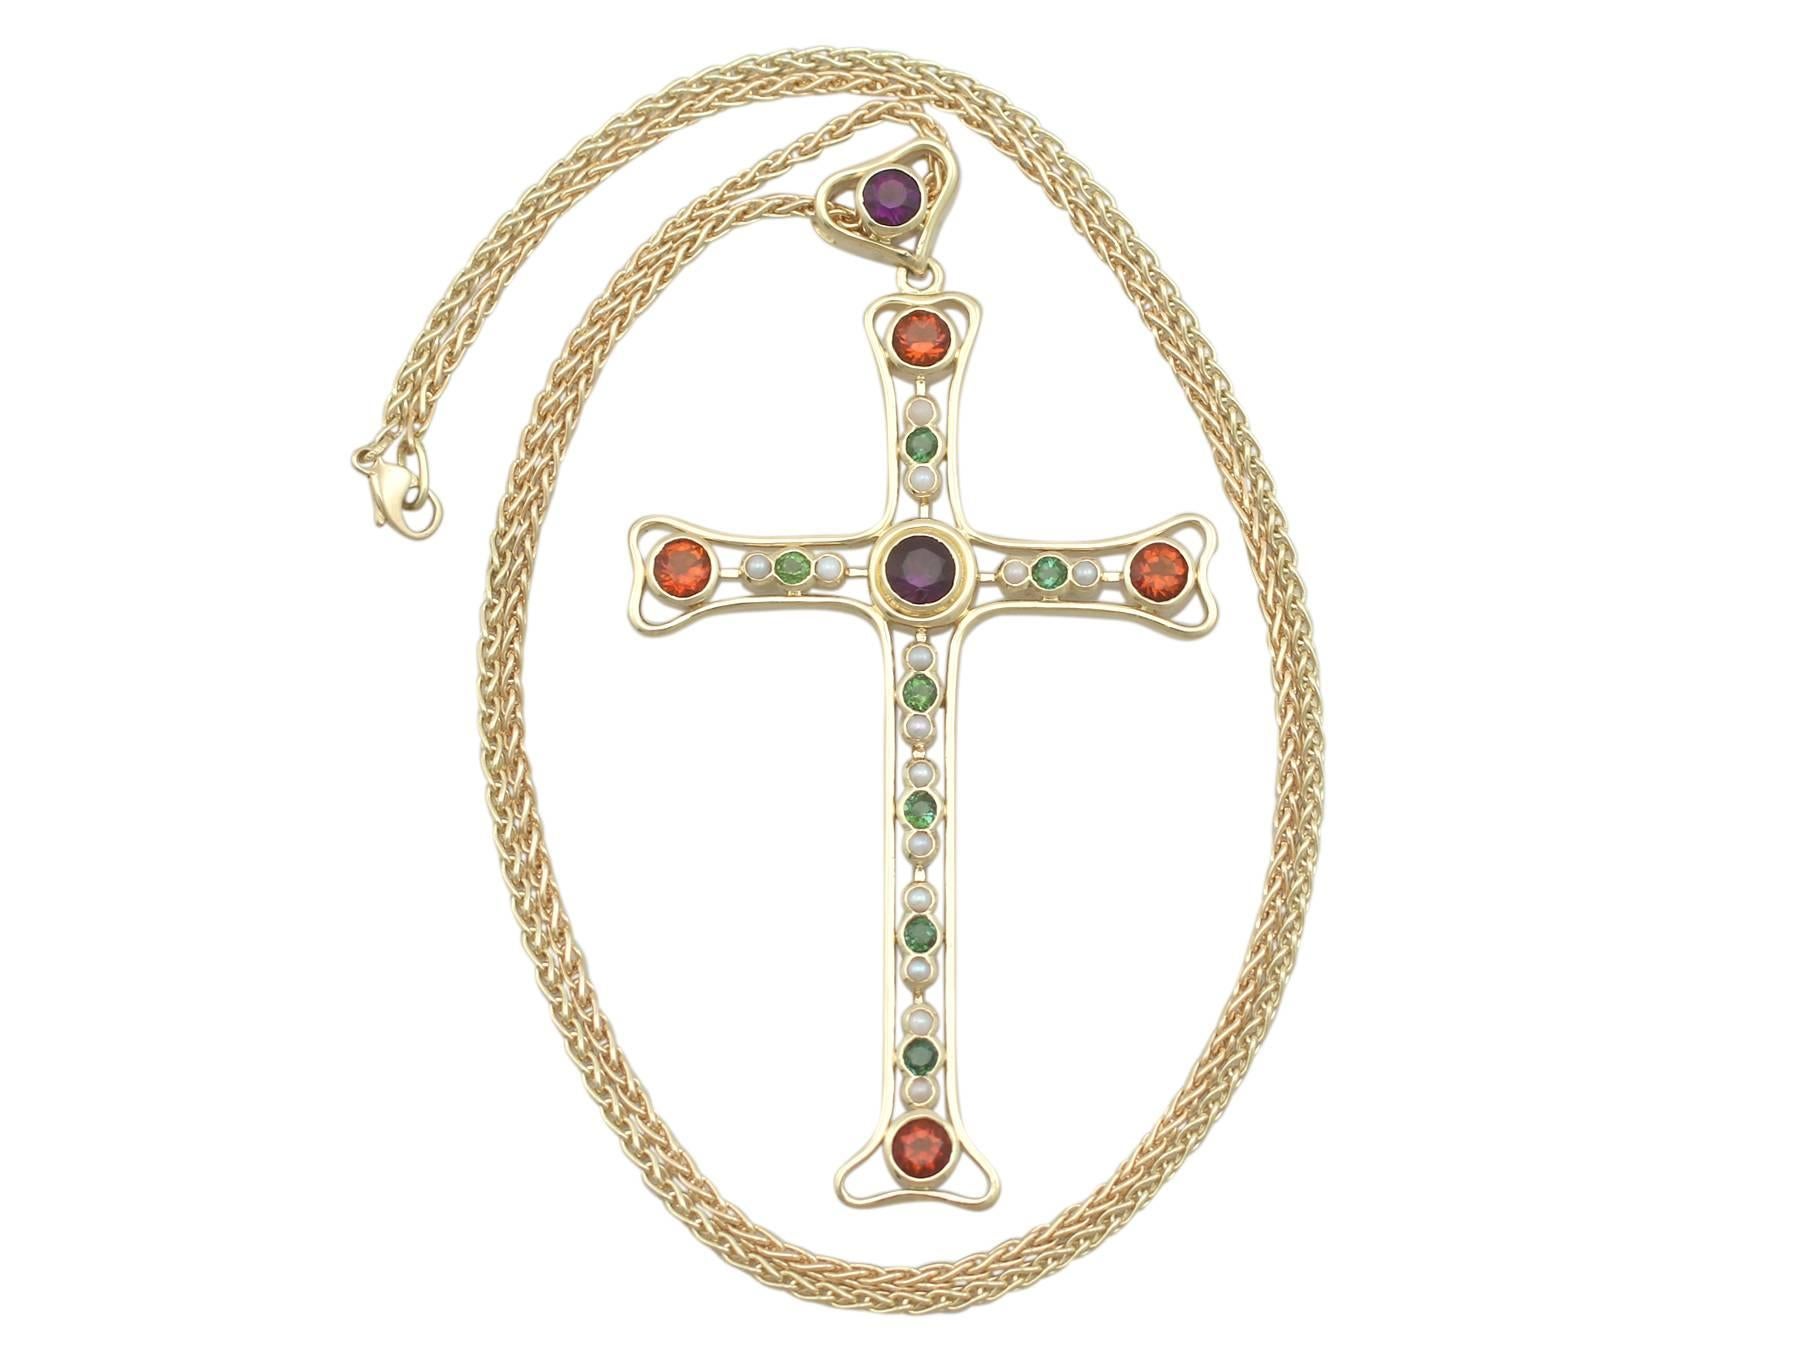 A stunning, fine and impressive vintage 3.35 carat amethyst, peridot, citrine and seed pearl, 18 karat yellow gold cross pendant; part of diverse vintage jewelry collections.

This stunning, fine and impressive Boodles cross pendant has been crafted